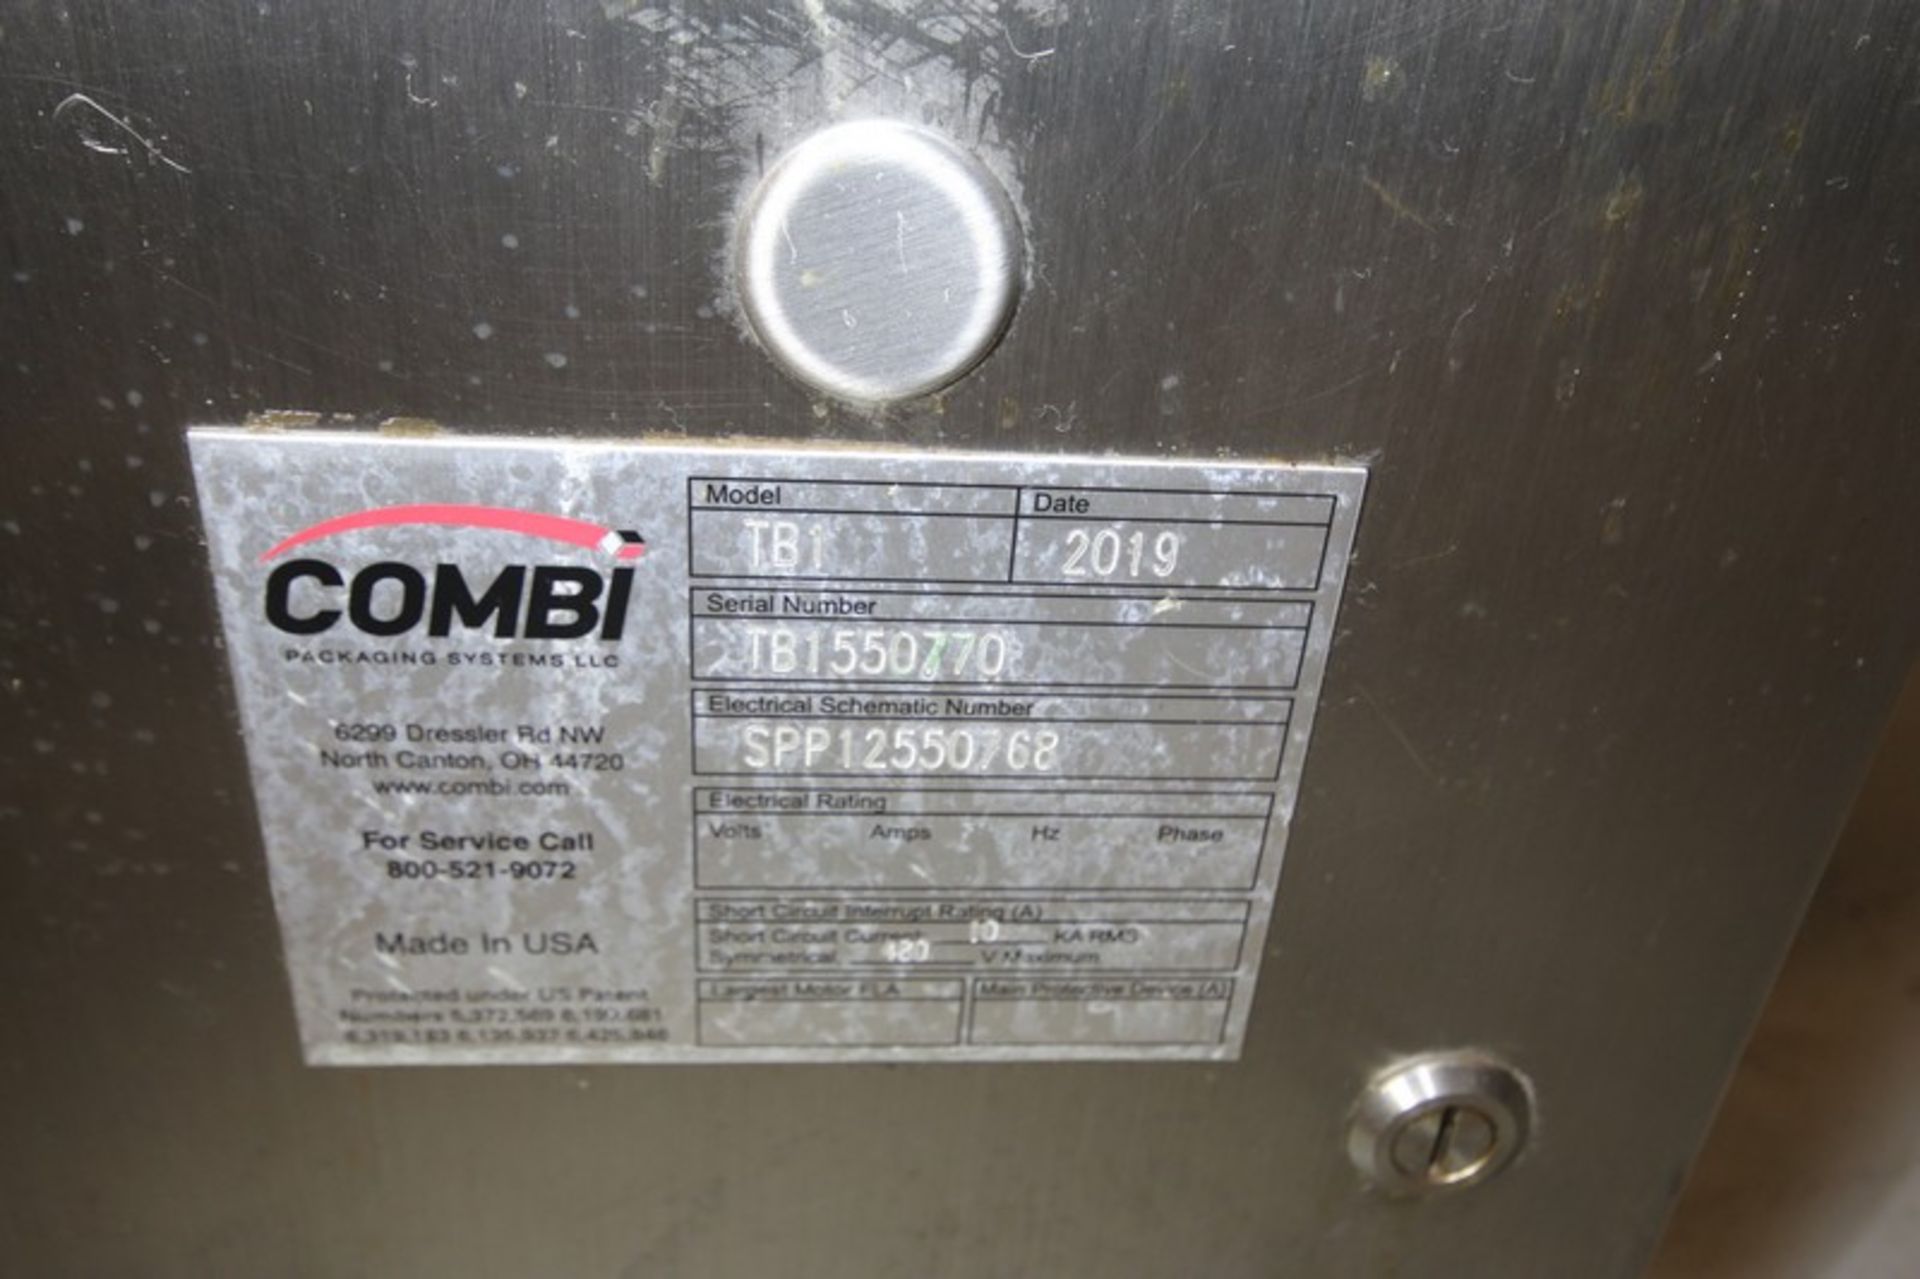 Combi Adustable S/S Case Sealer, Model TB1, SN TB1550770, 480V (INV#83495)(Located @ the MDG Auction - Image 6 of 6